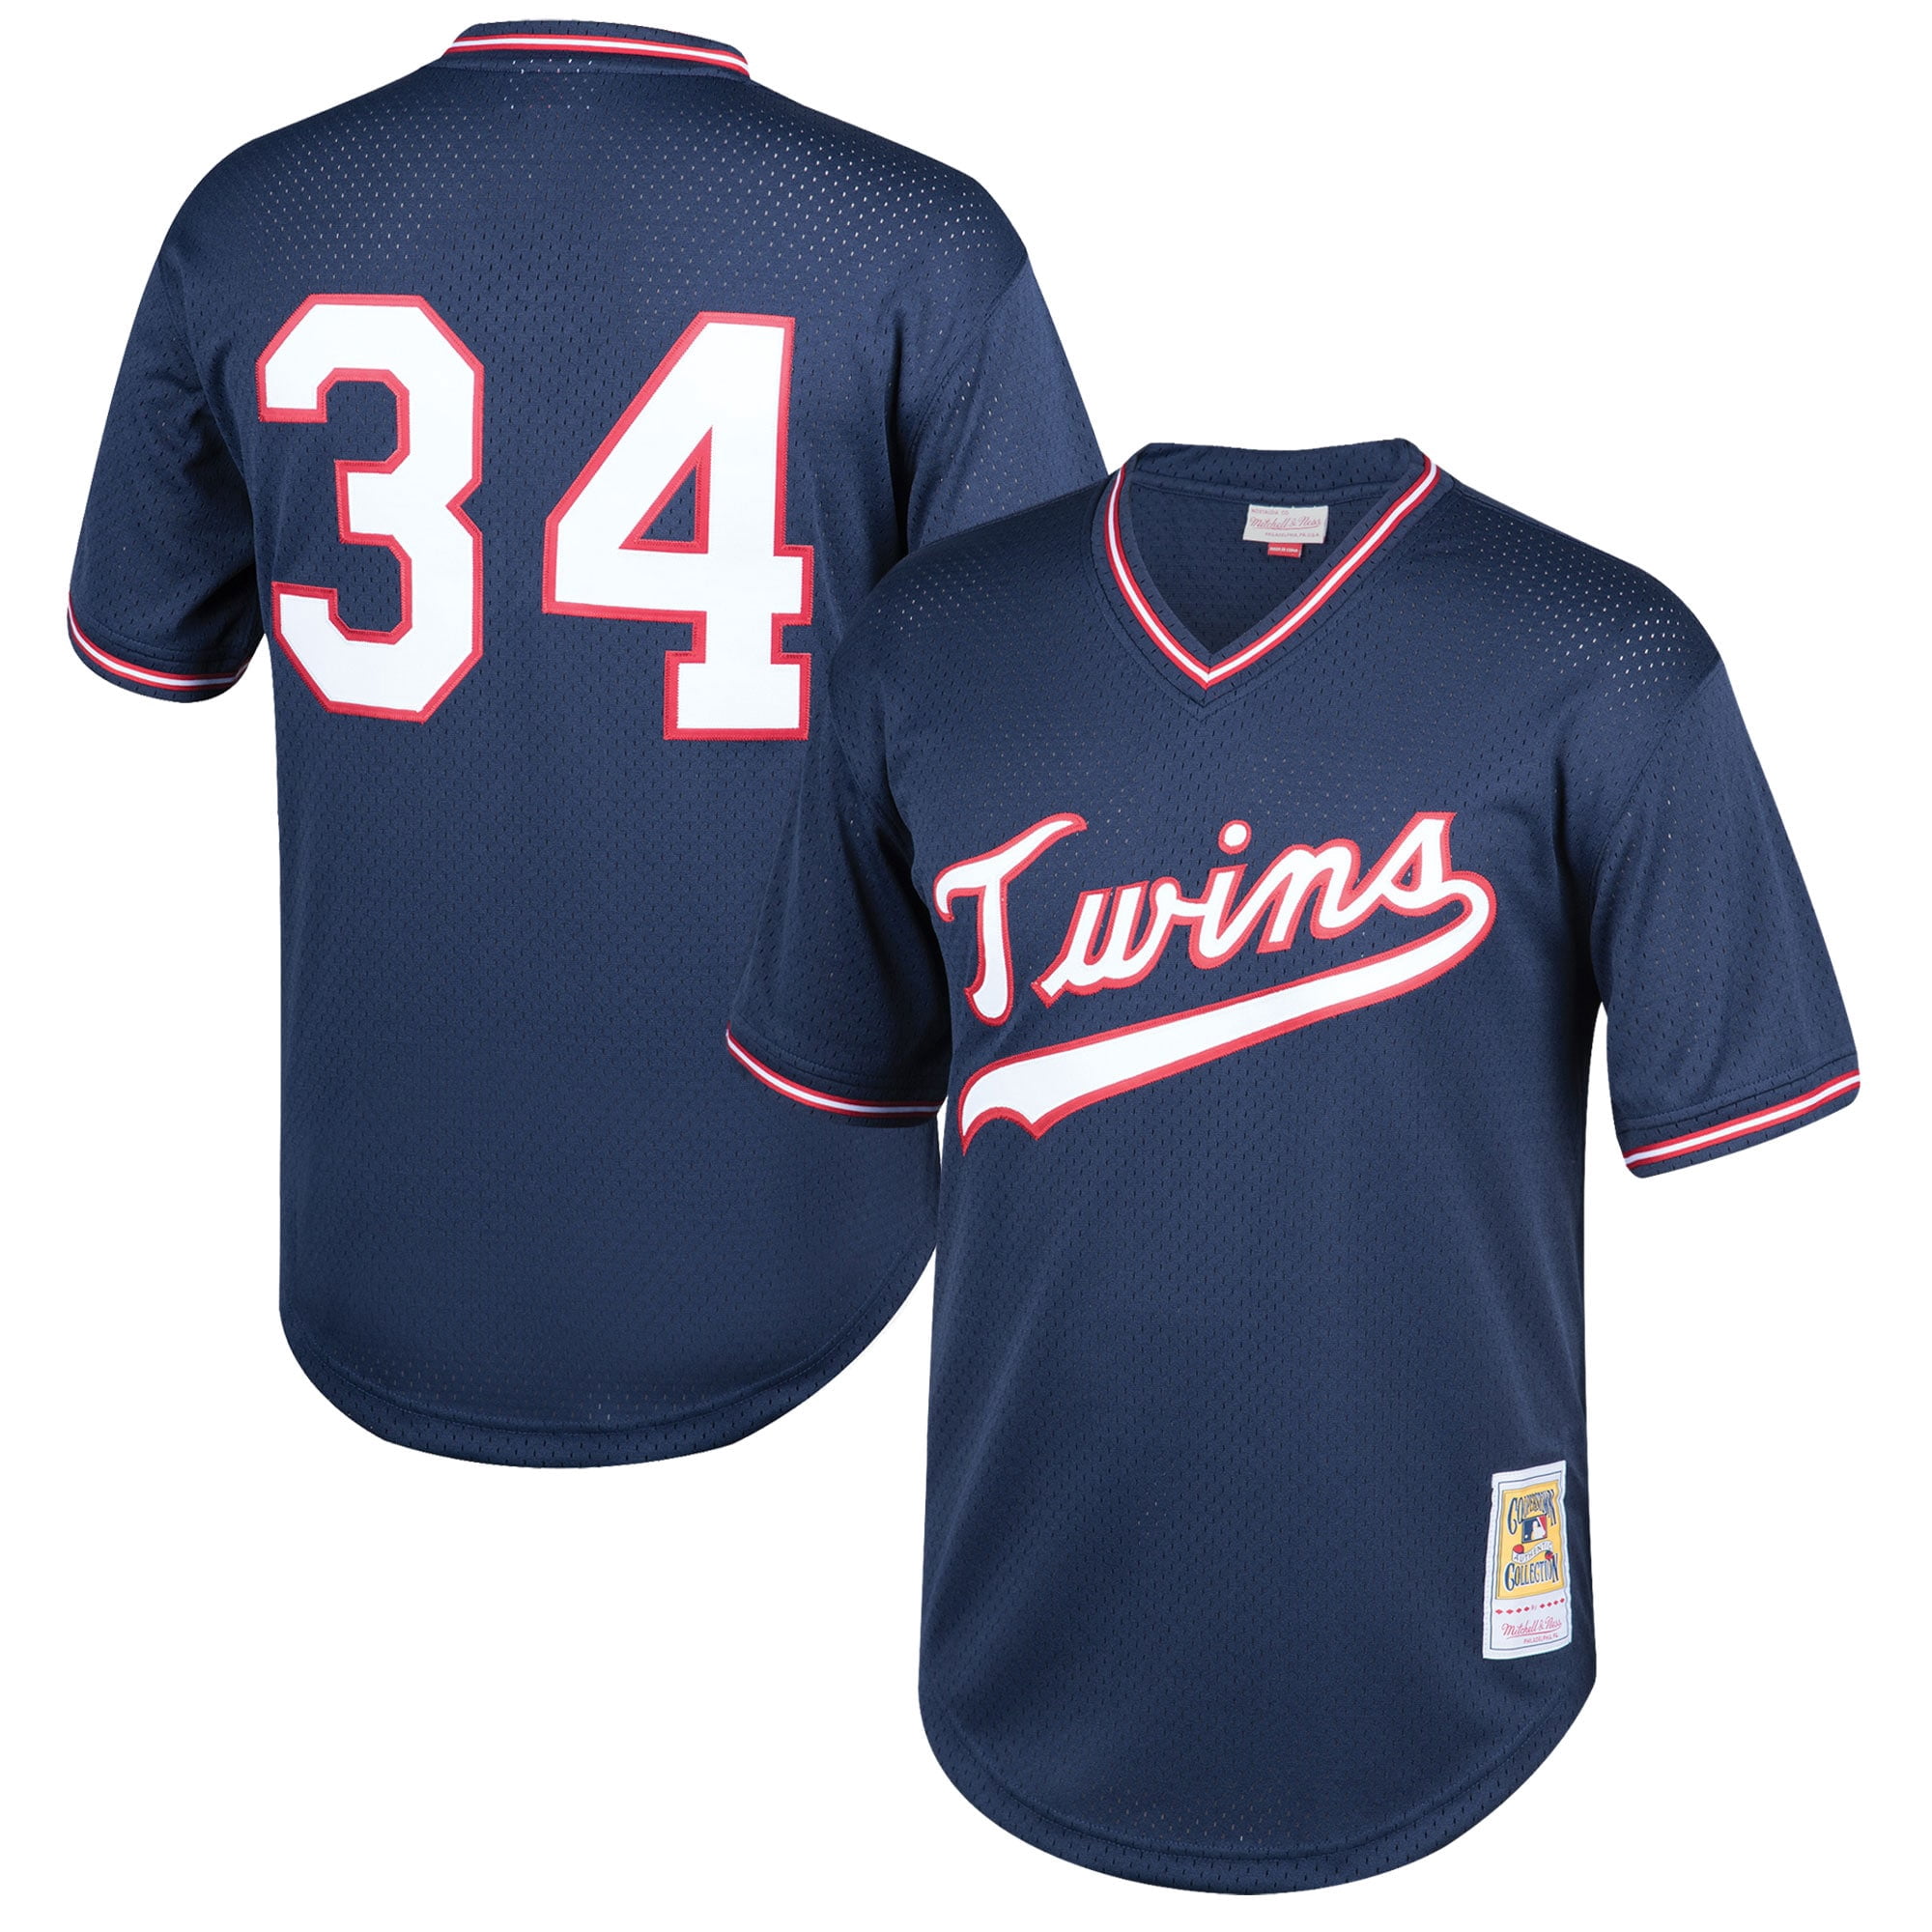 Youth Mitchell & Ness Kirby Puckett Navy Minnesota Twins Cooperstown  Collection Mesh Batting Practice Jersey 